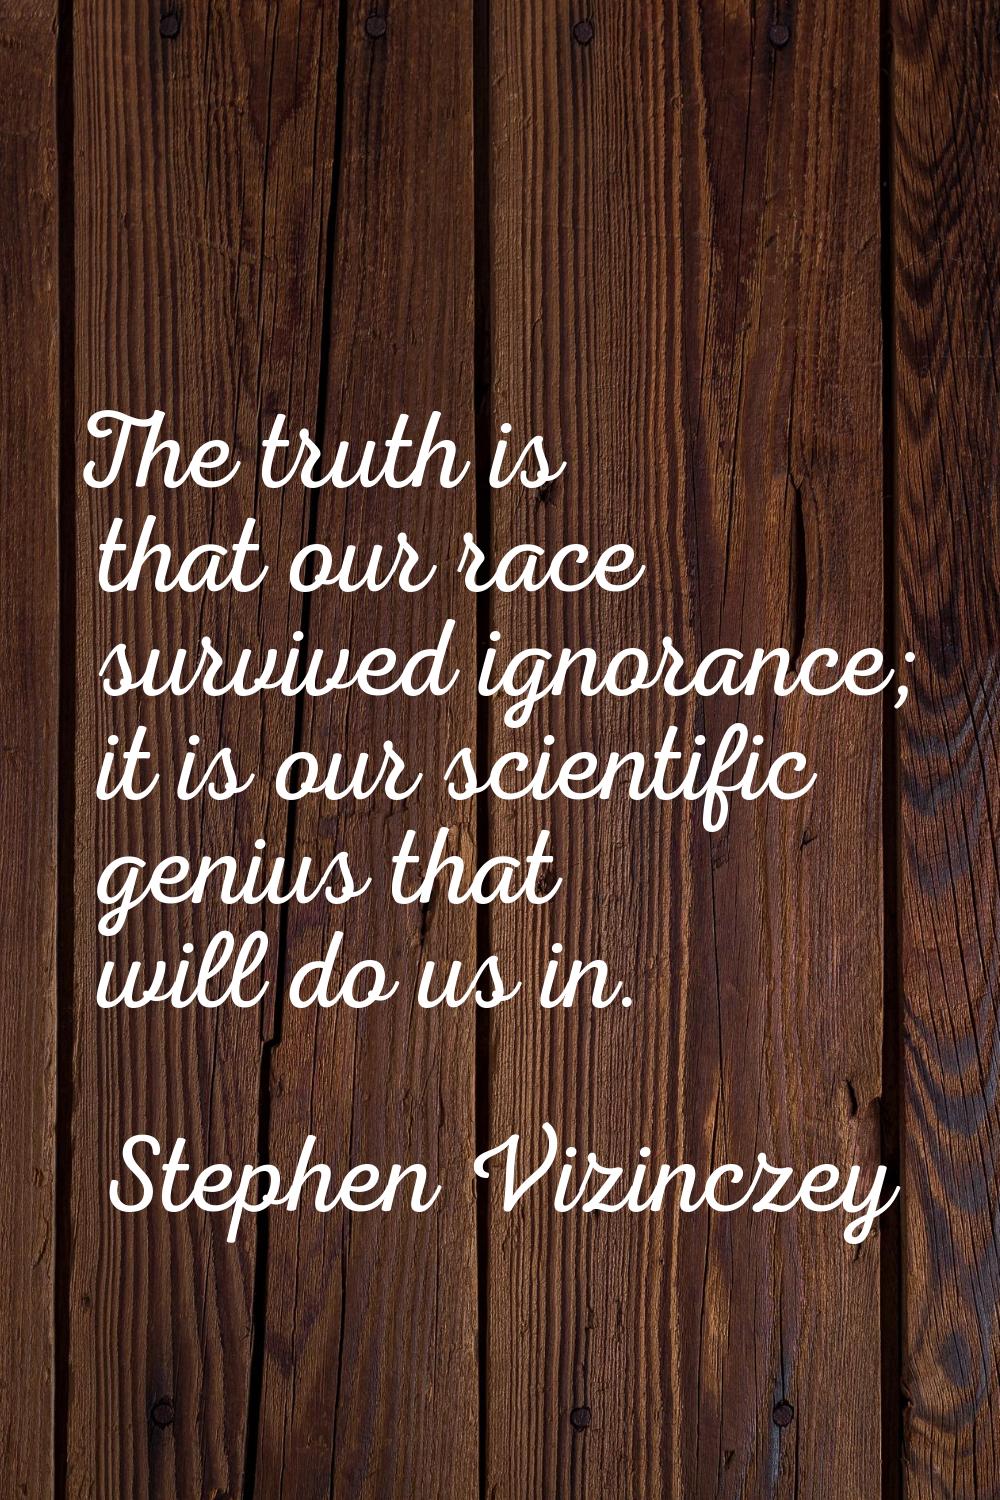 The truth is that our race survived ignorance; it is our scientific genius that will do us in.